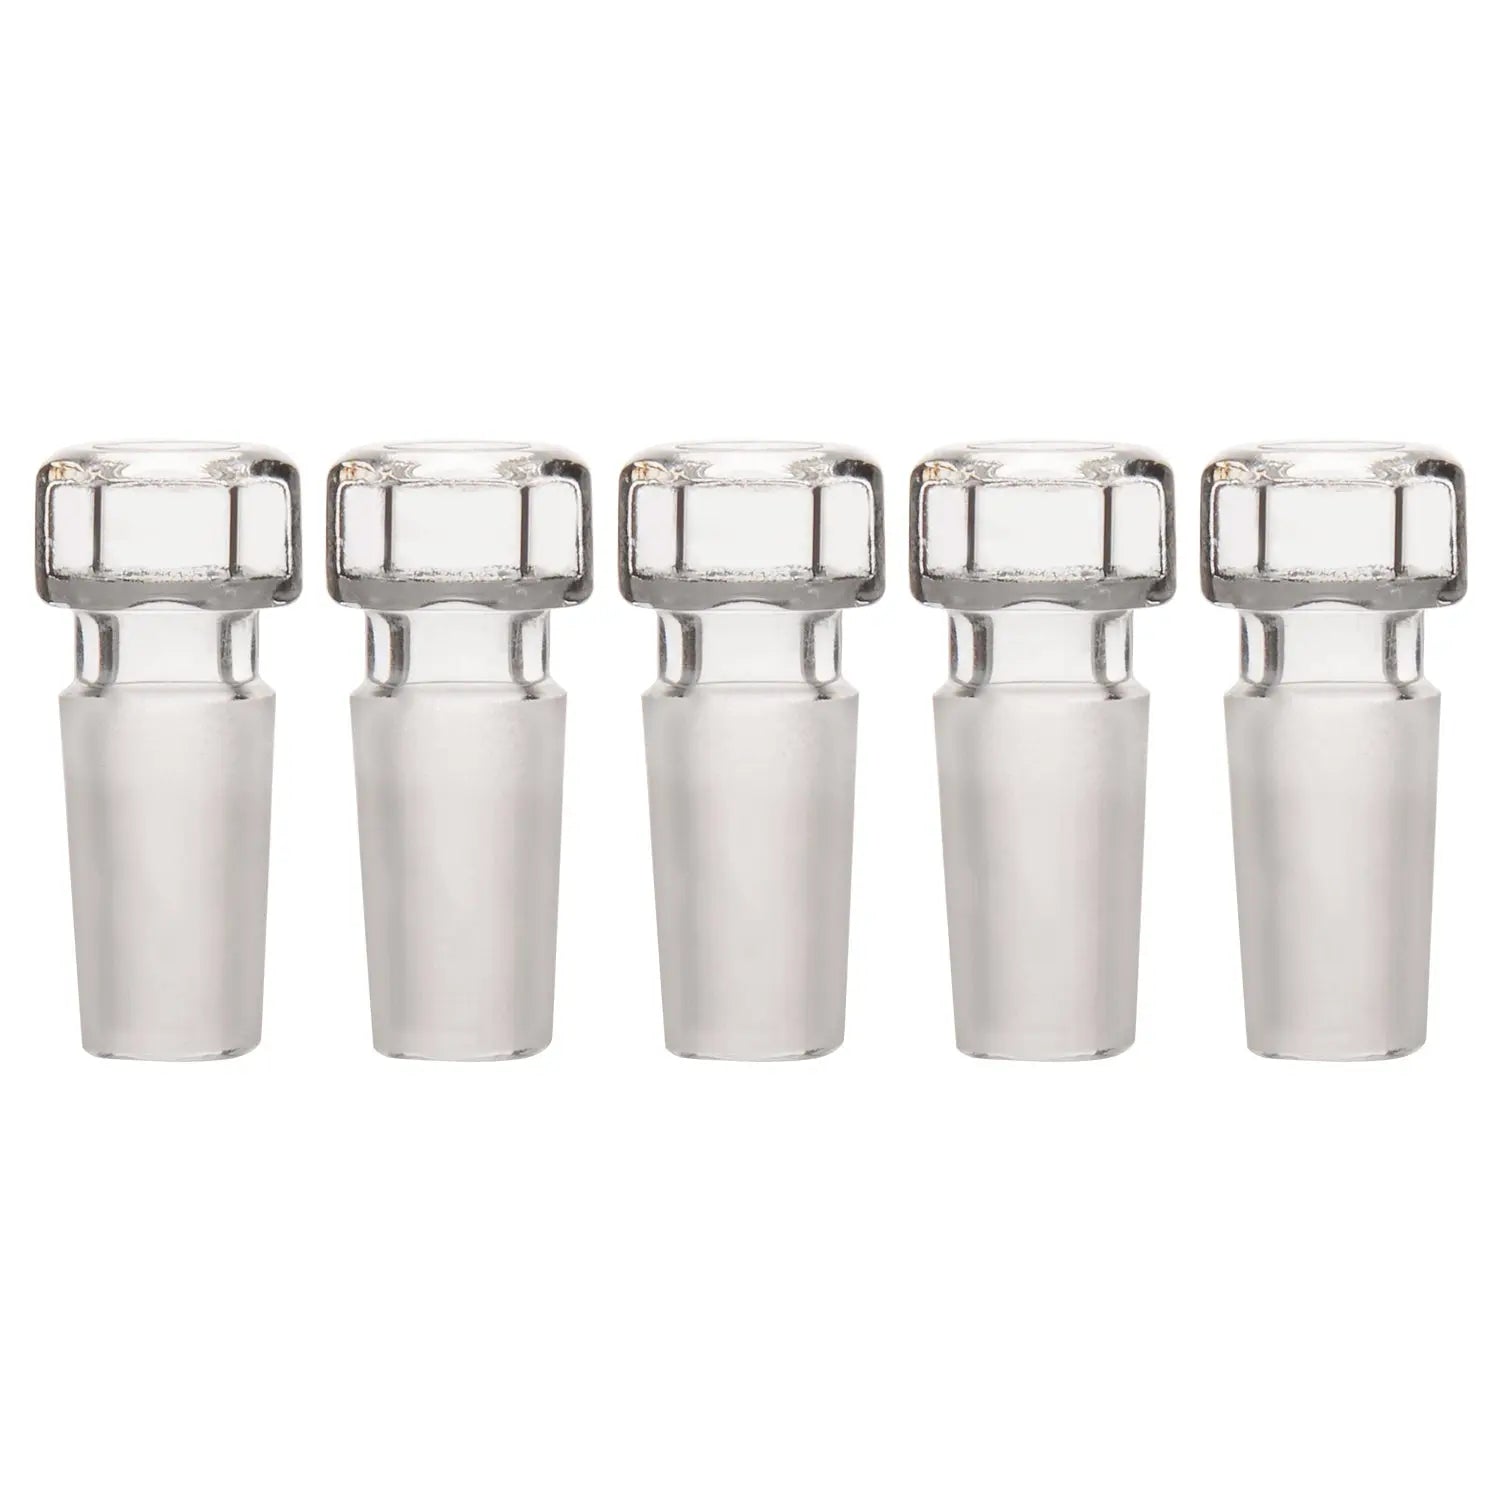 Hex Head Glass Hollow Stopper, 5 Pack - StonyLab Stoppers 14-20